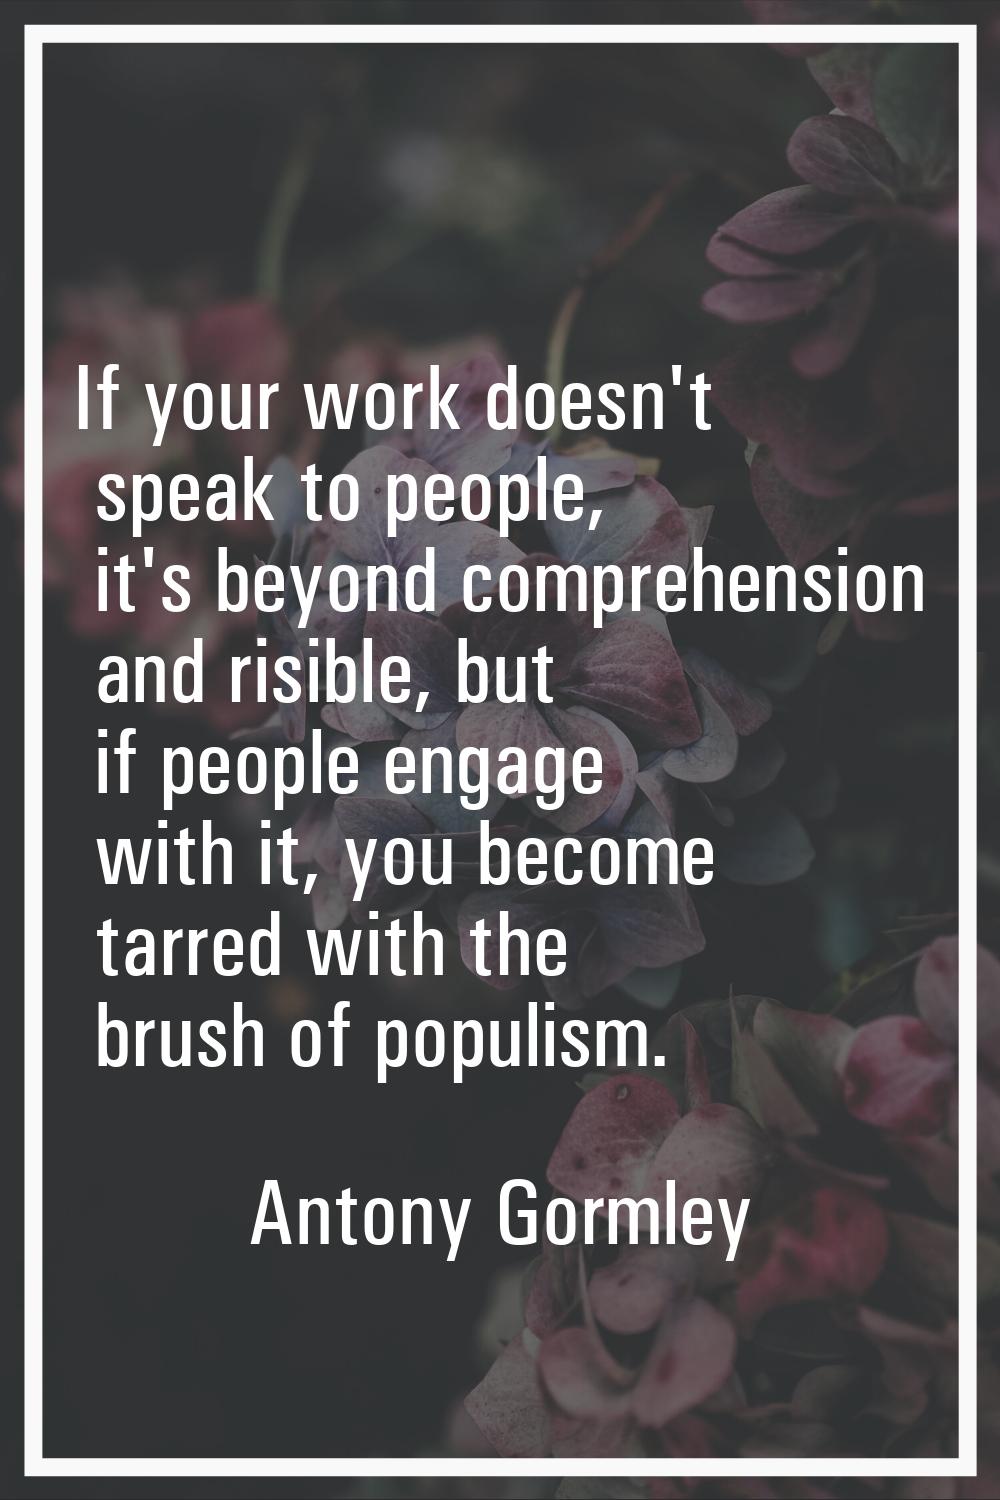 If your work doesn't speak to people, it's beyond comprehension and risible, but if people engage w